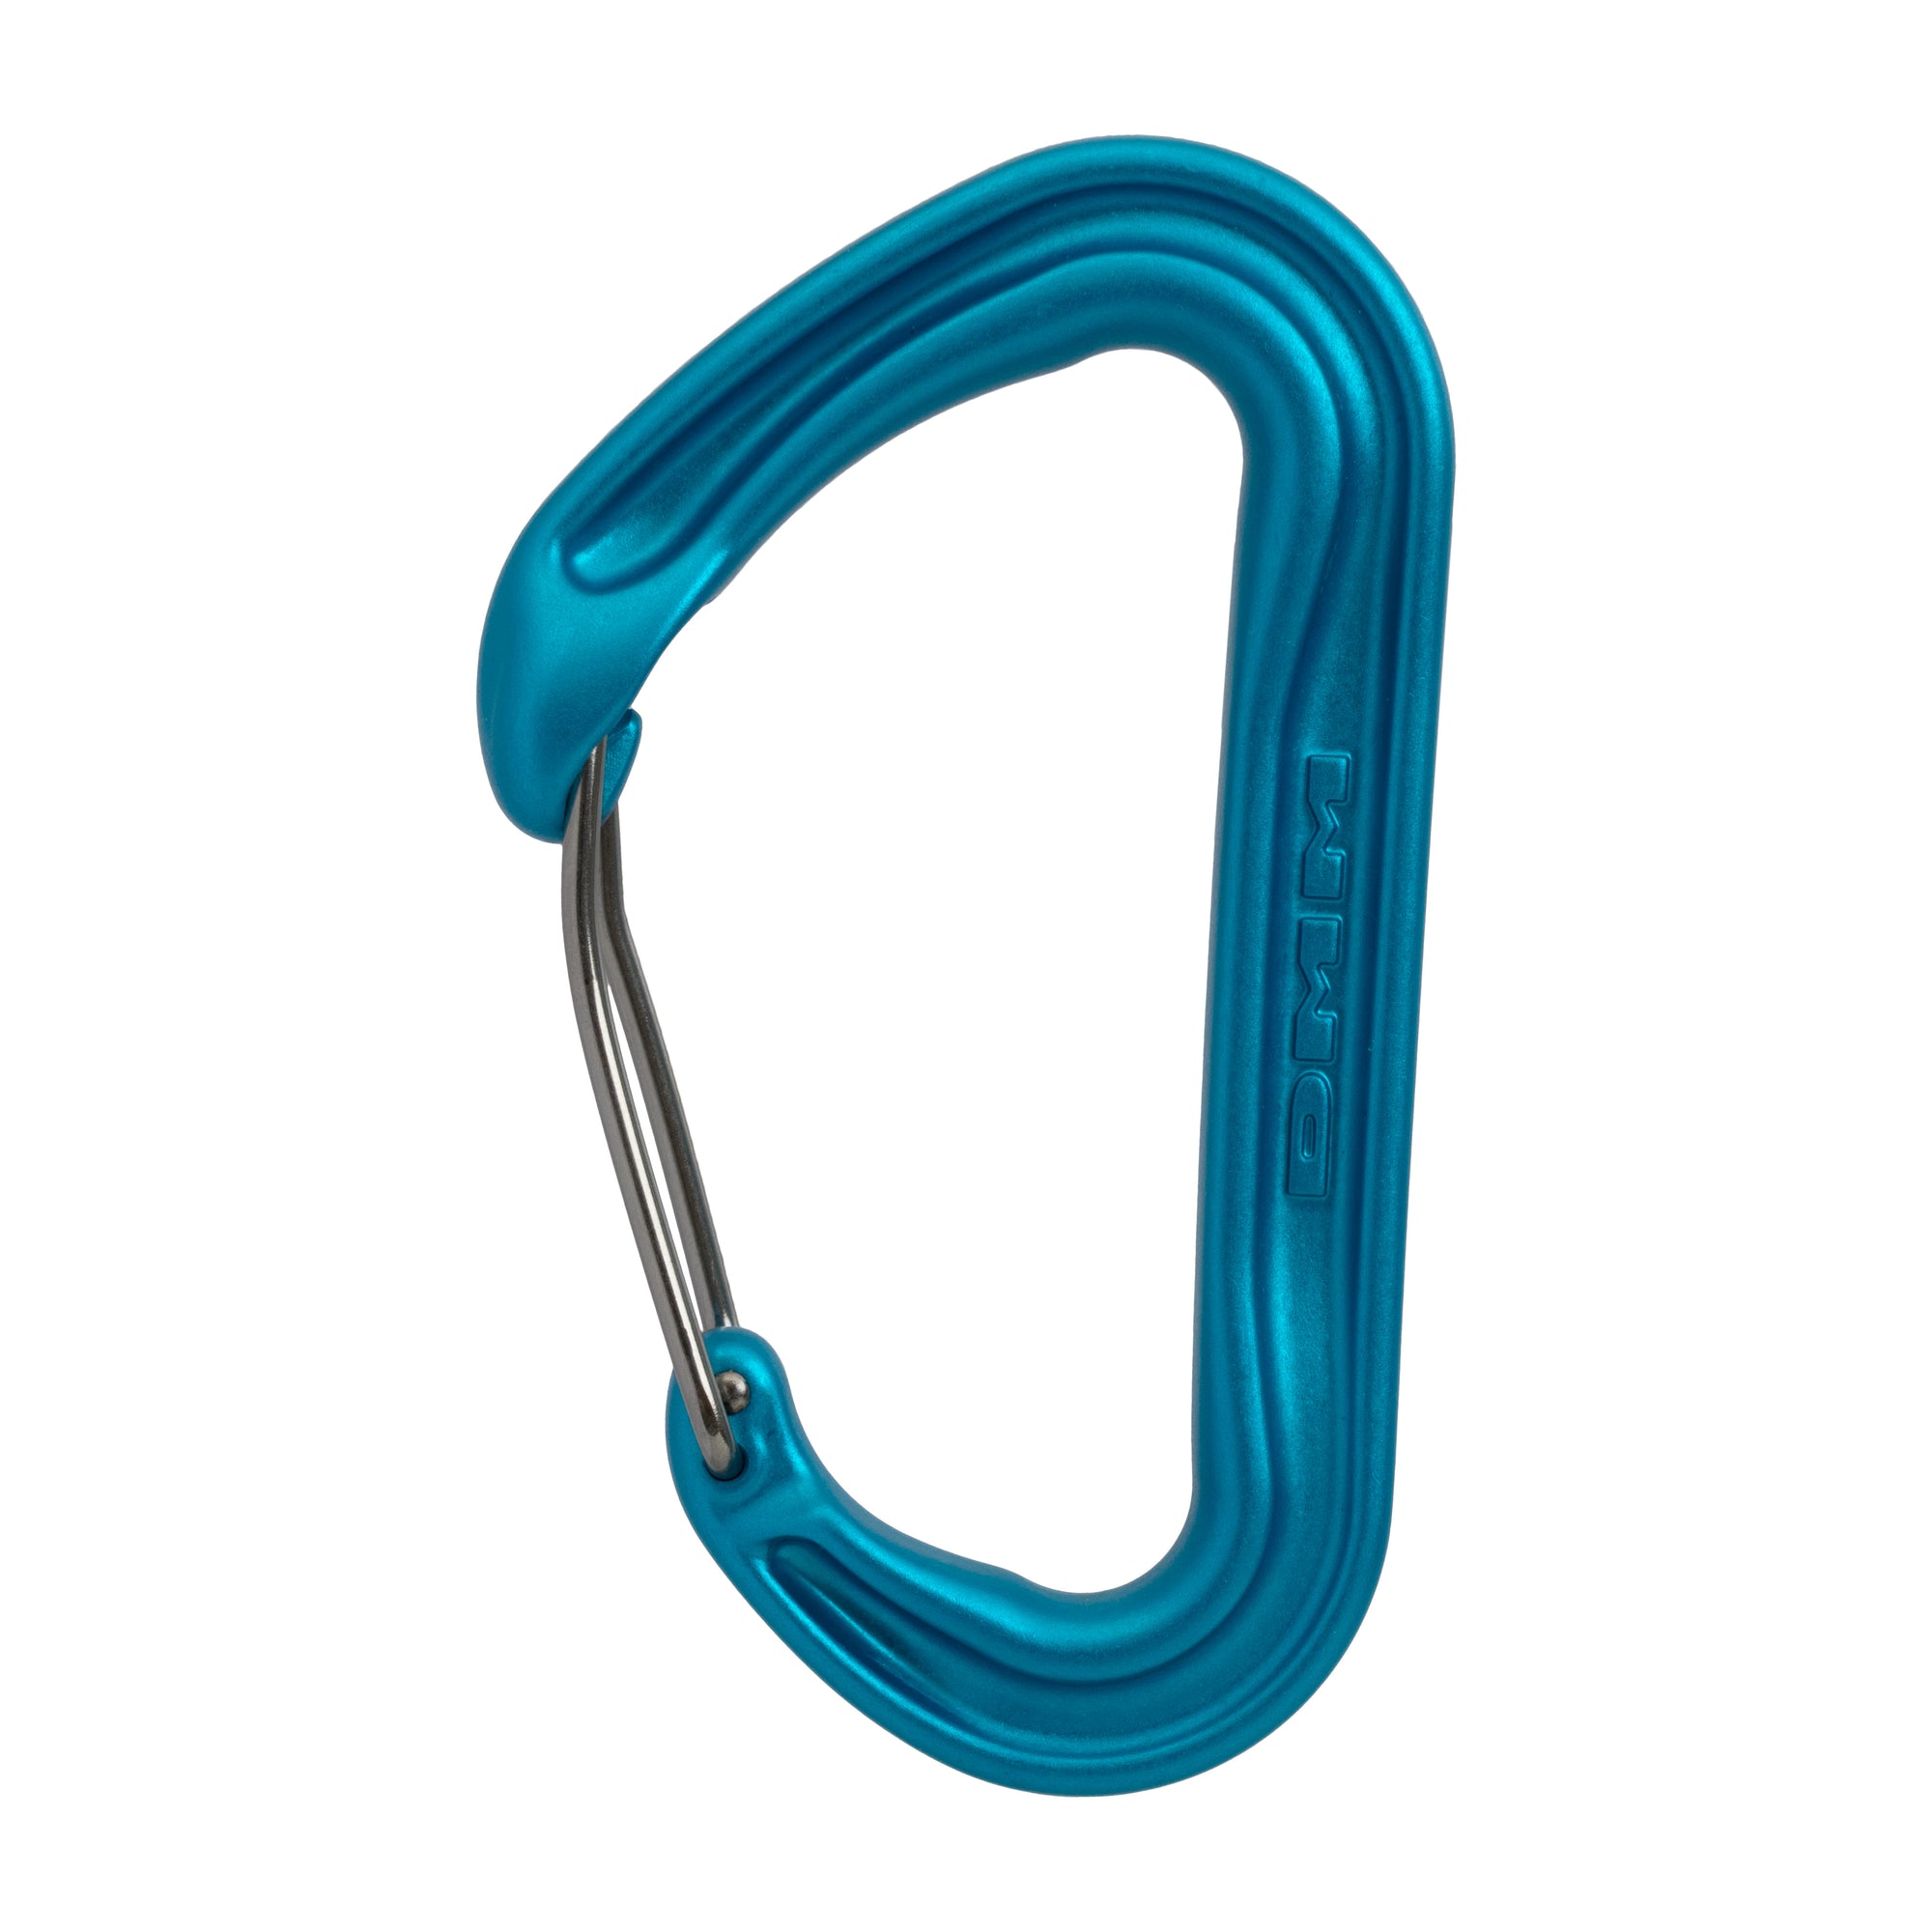 DMM Aether Carabiner Turquoise